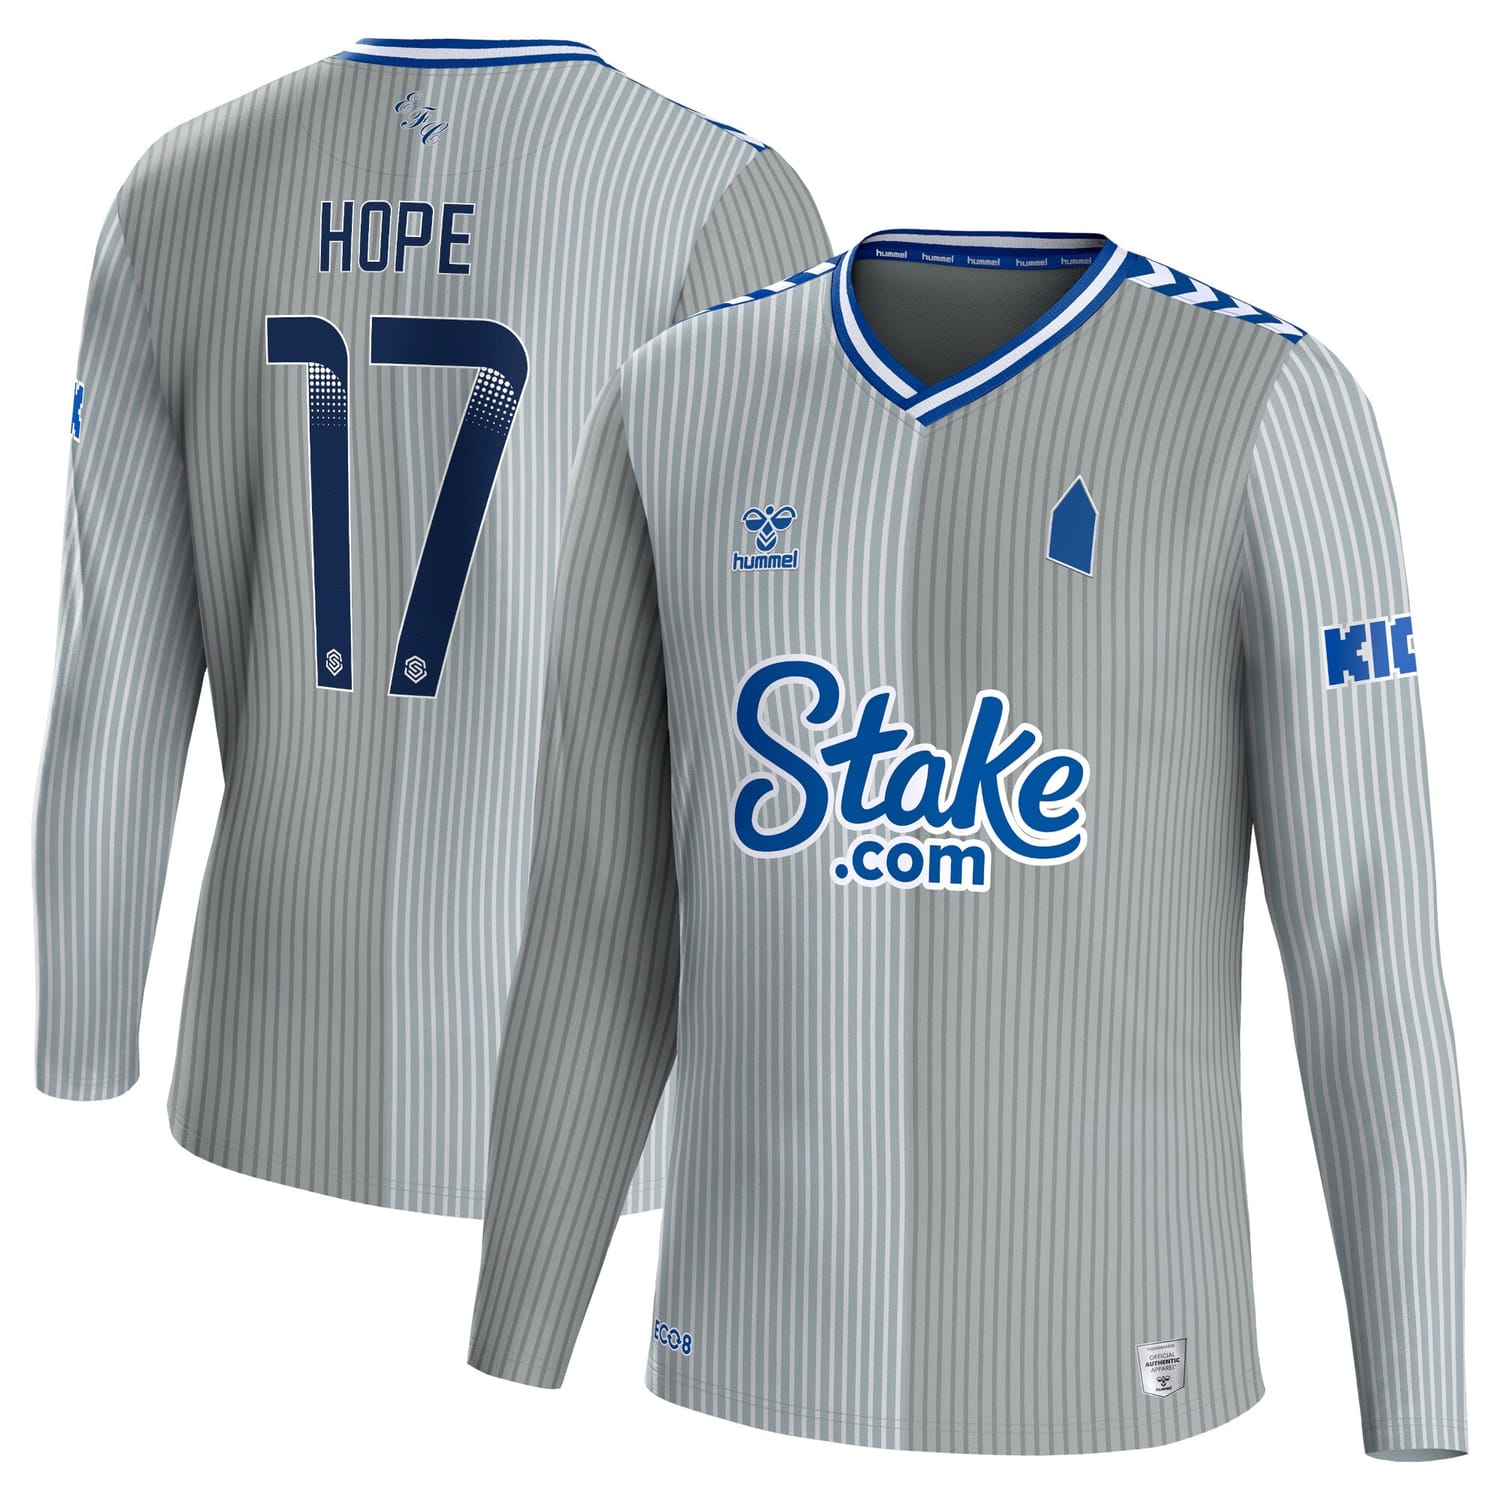 Premier League Everton Third WSL Jersey Shirt Long Sleeve 2023-24 player Lucy Hope 17 printing for Men